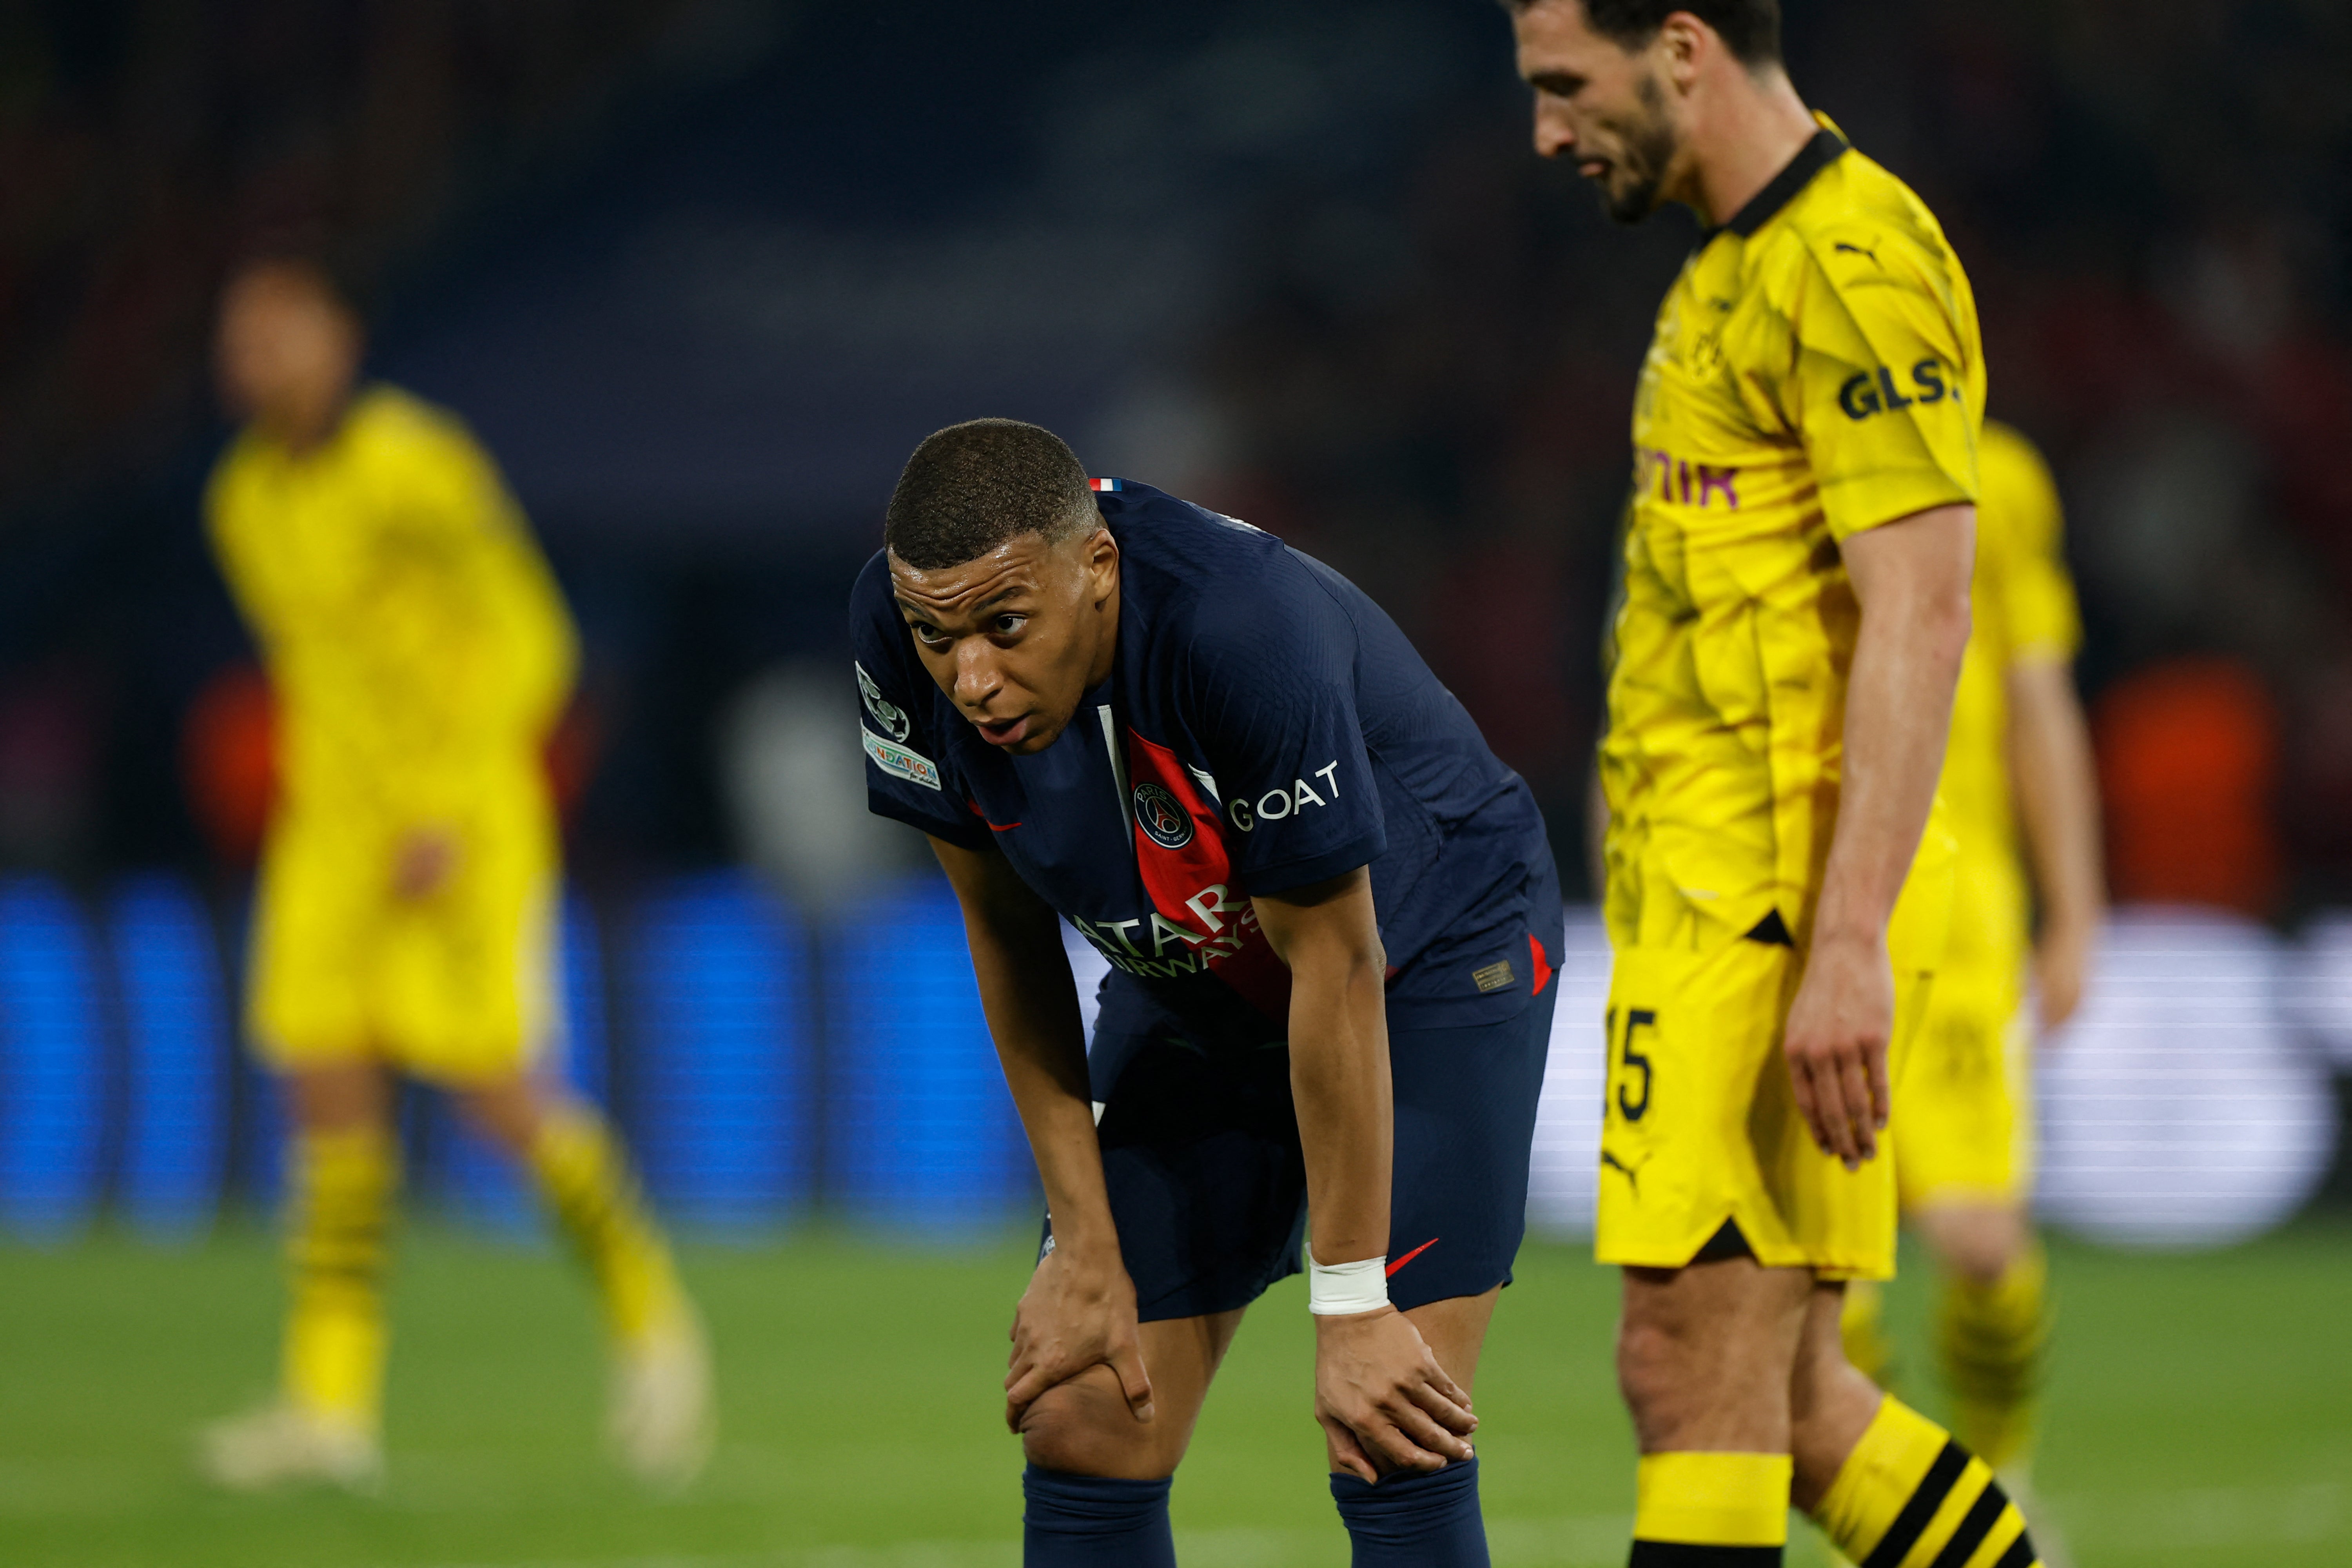 Kylian Mbappe’s final Champions League match with PSG ends in defeat